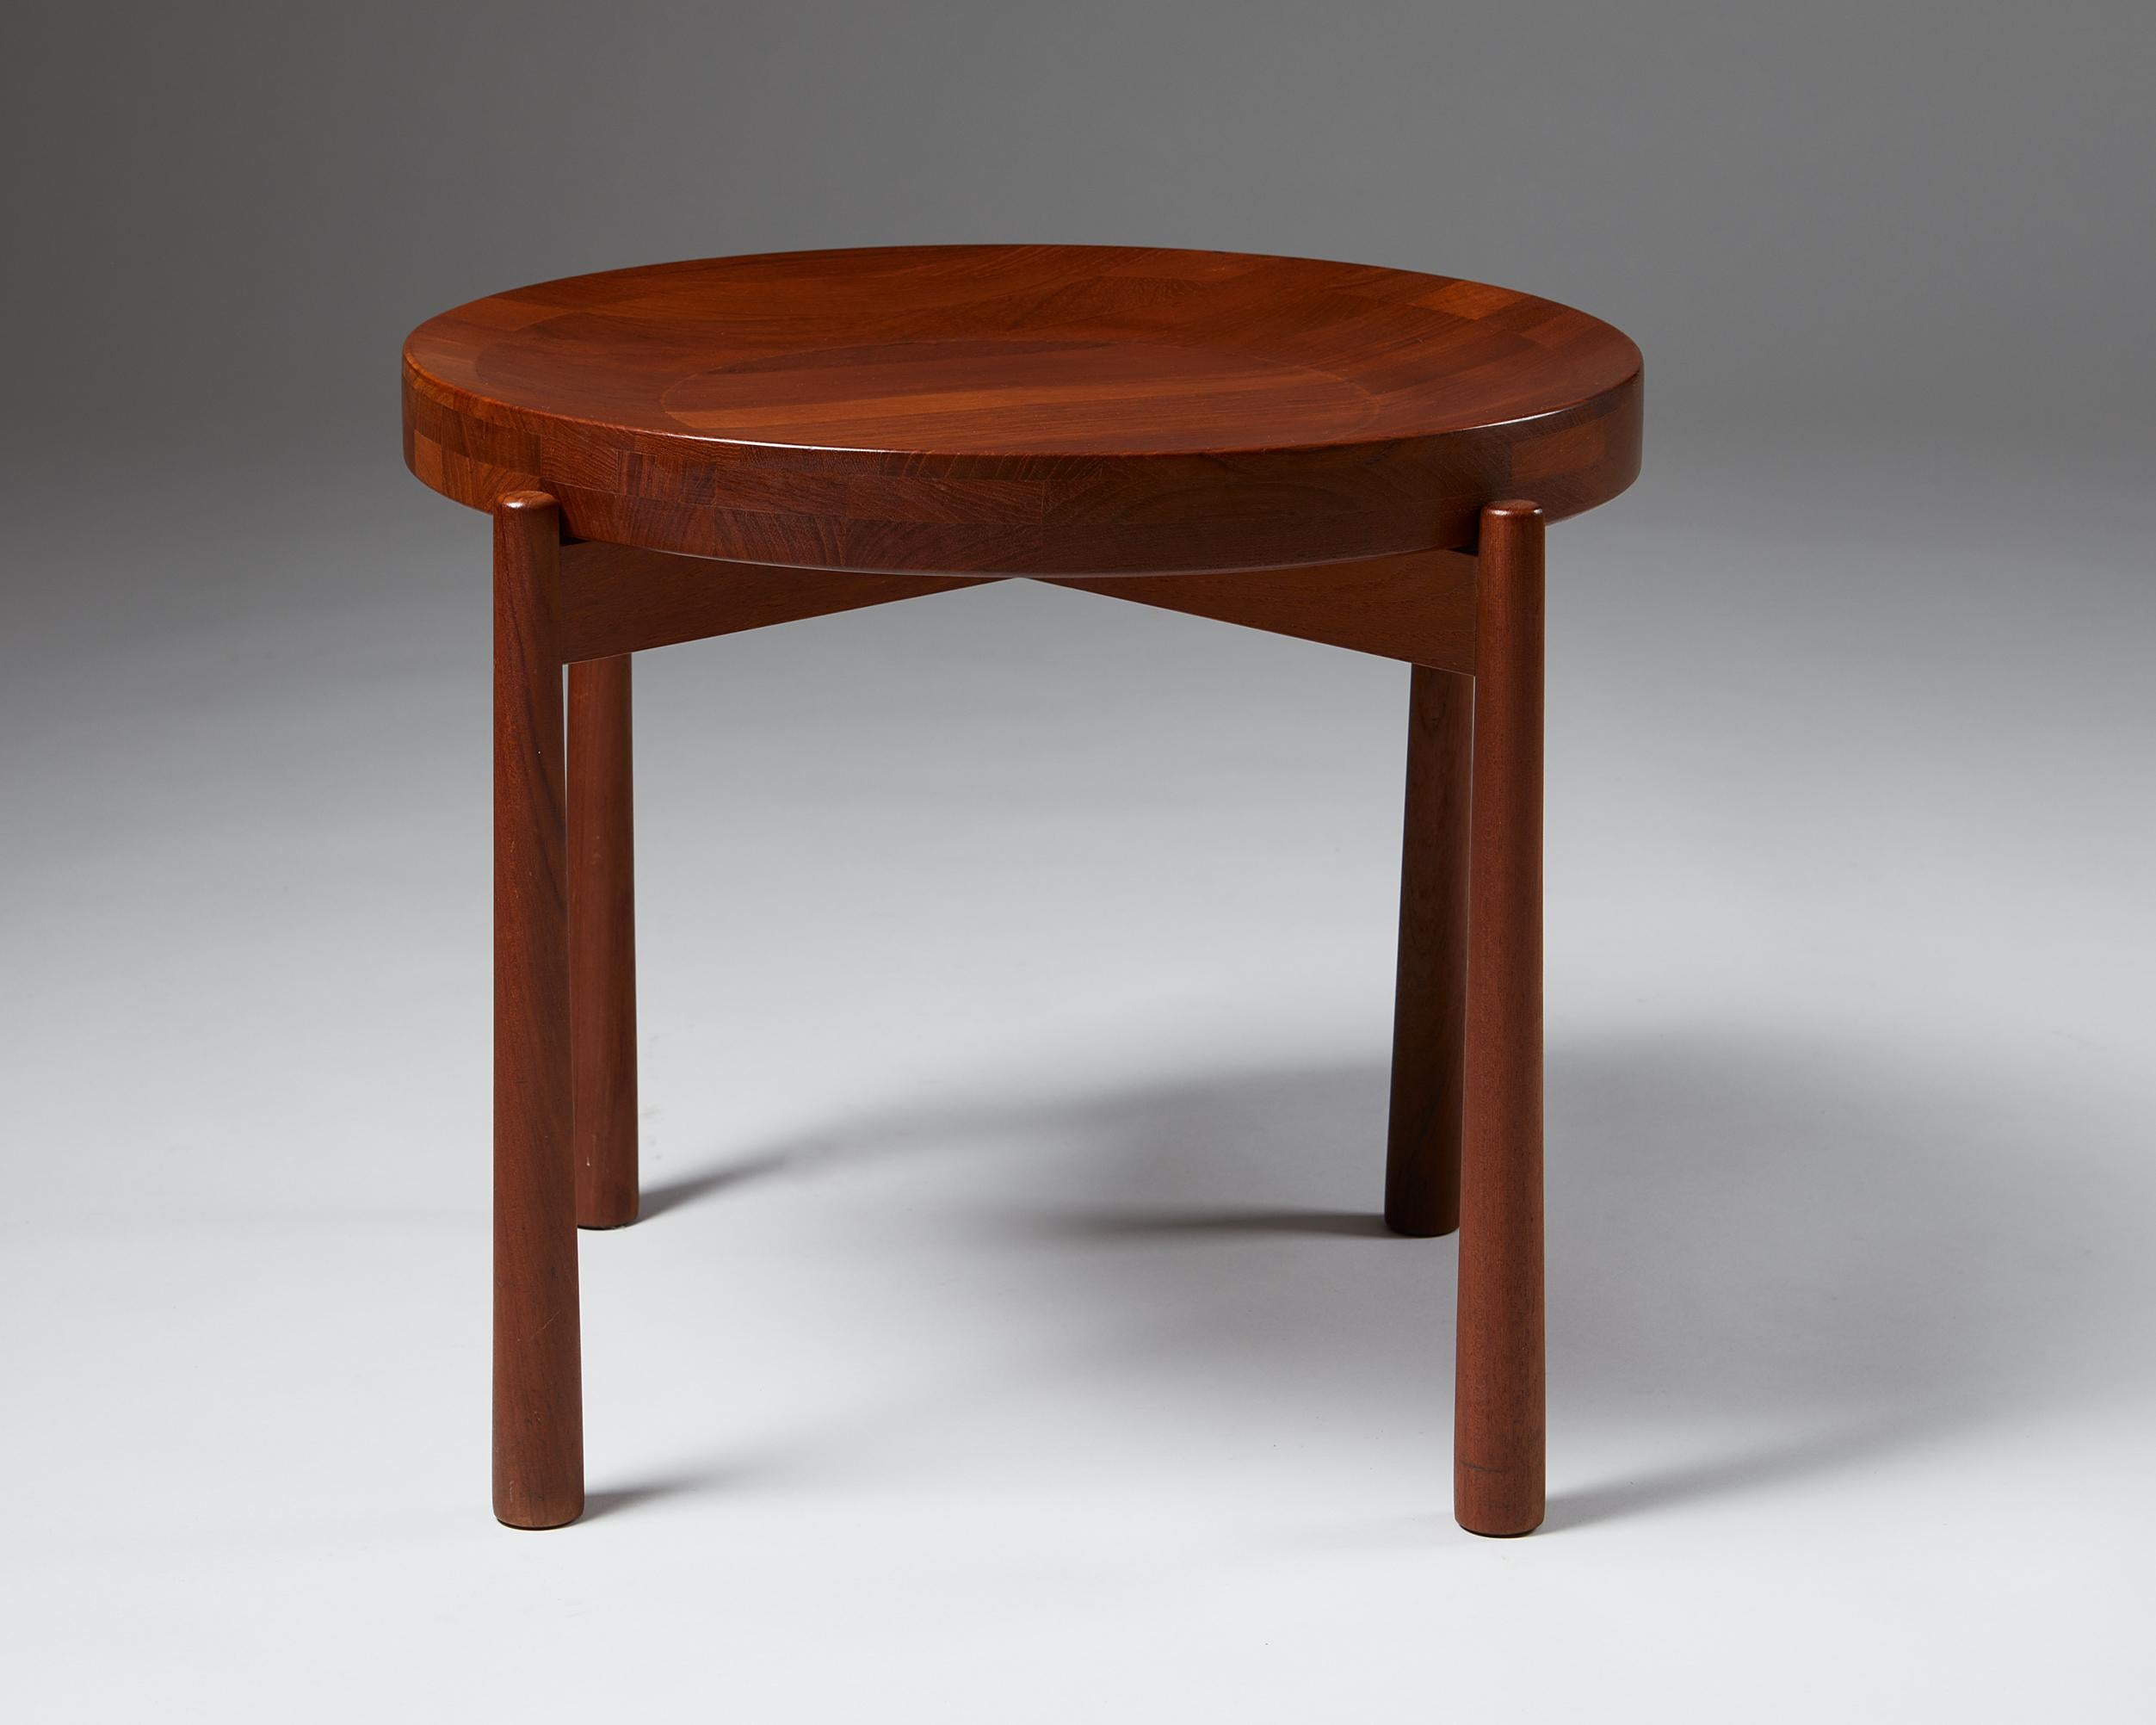 20th Century Tray tables designed by Jens Quistgaard